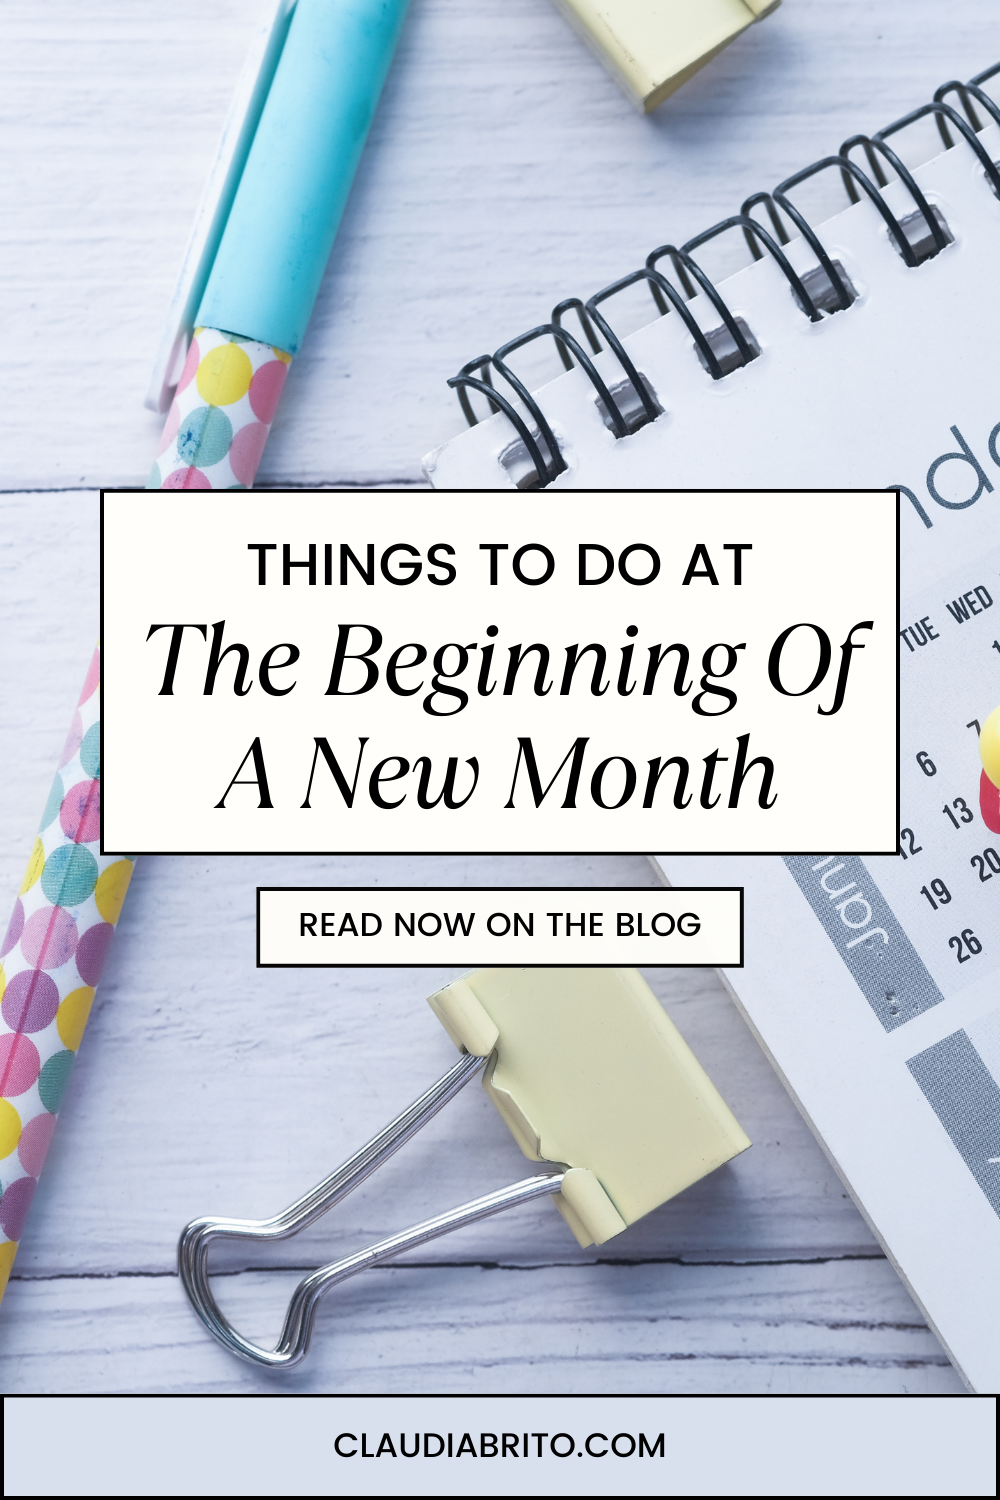 What To Do At The Beginning Of A New Month